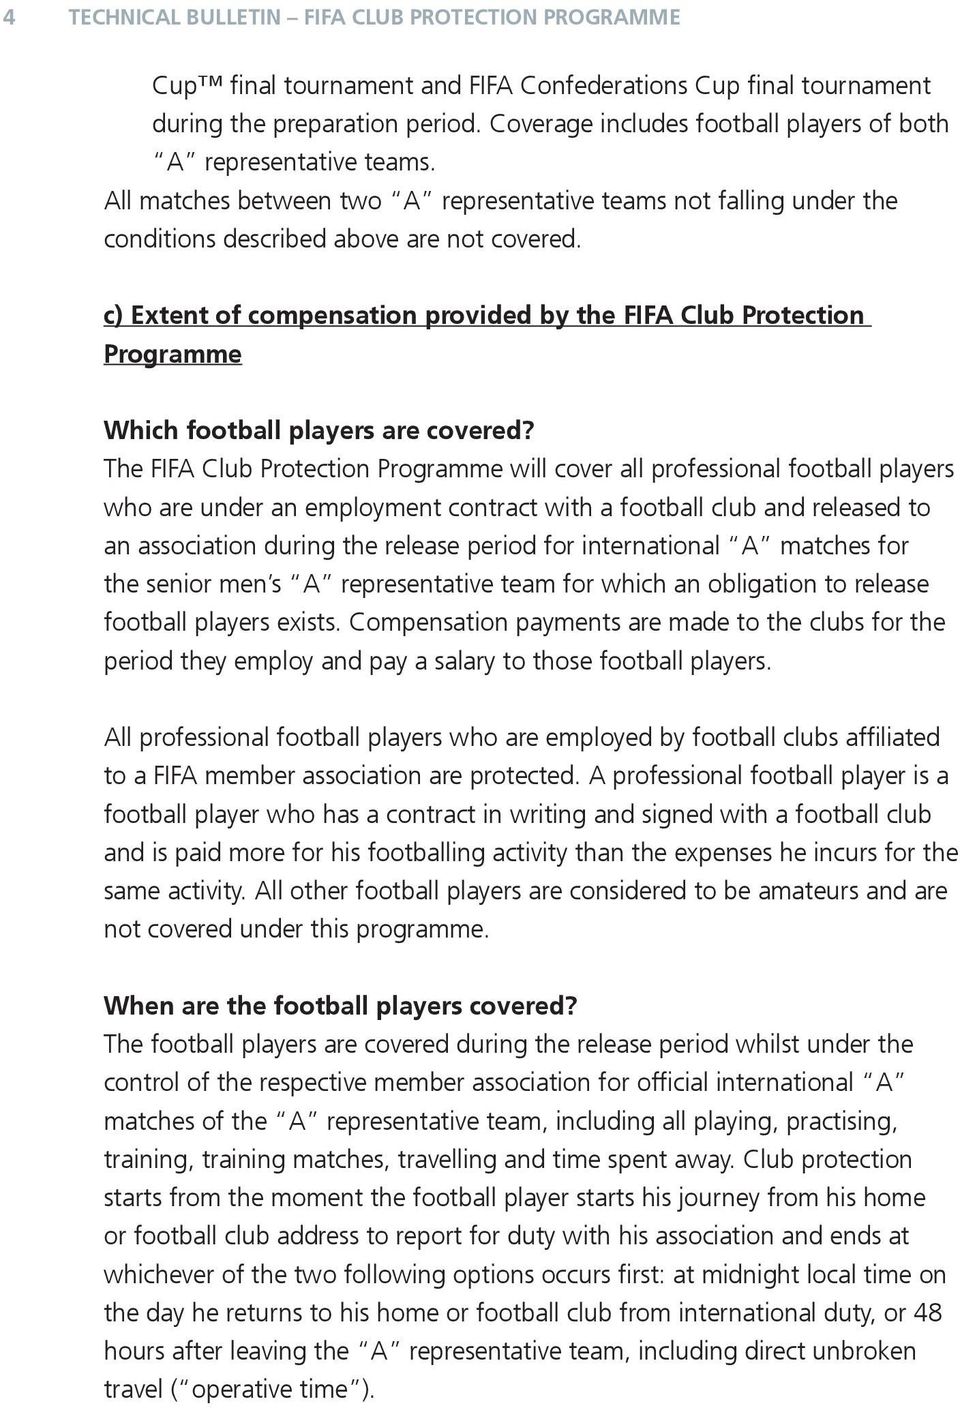 c) Extent compensation provided by FIFA Club Protection Programme Which football players are covered?